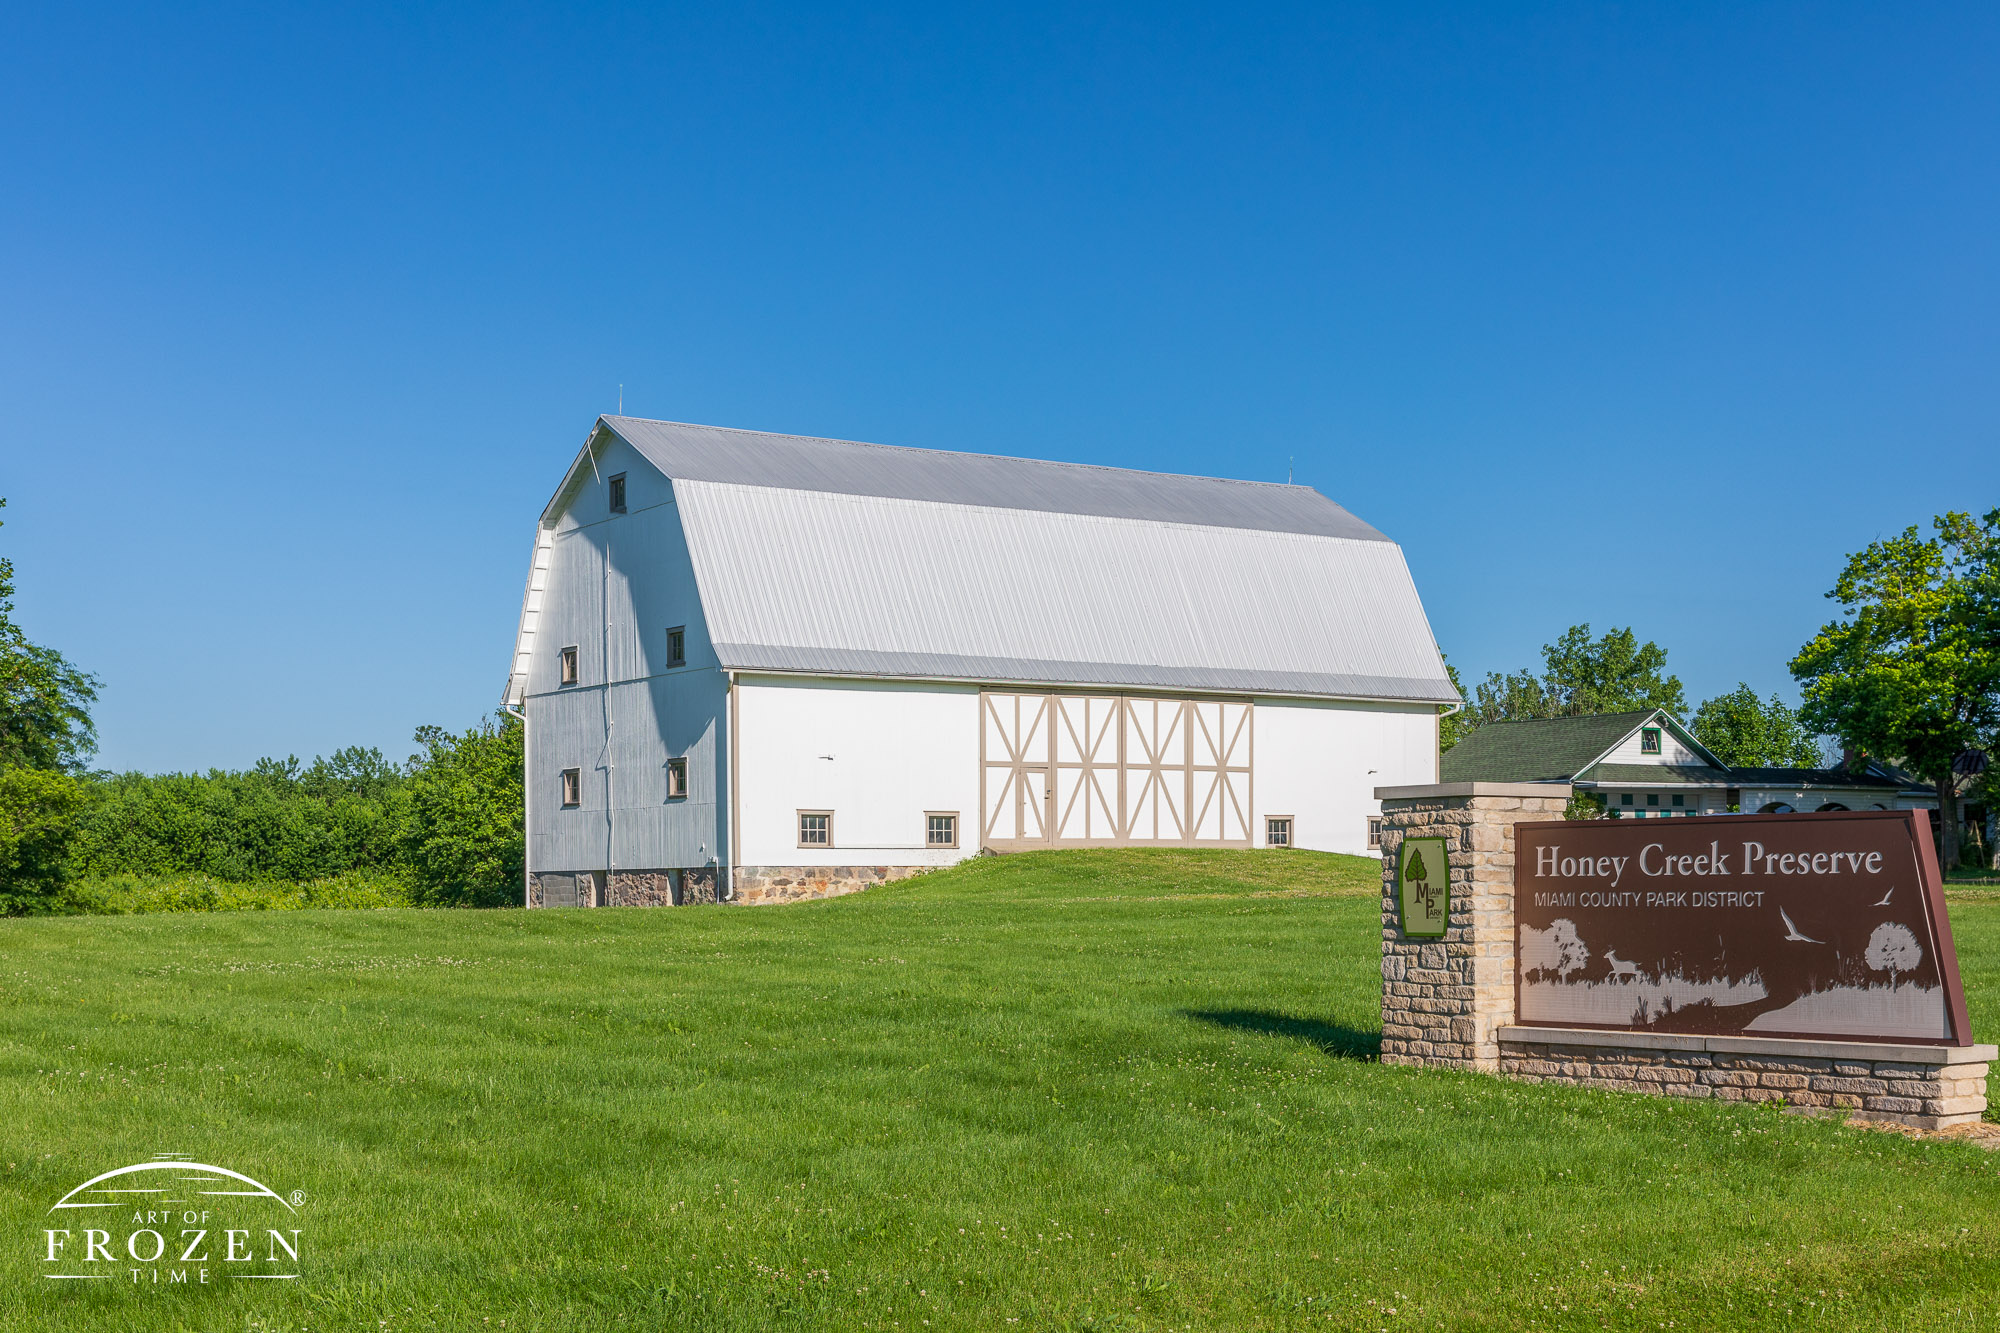 A white barn stands at the entrance of Honey Creek Preserve, outside Tipp City Ohio surrounding by lush vegetation and blue skies